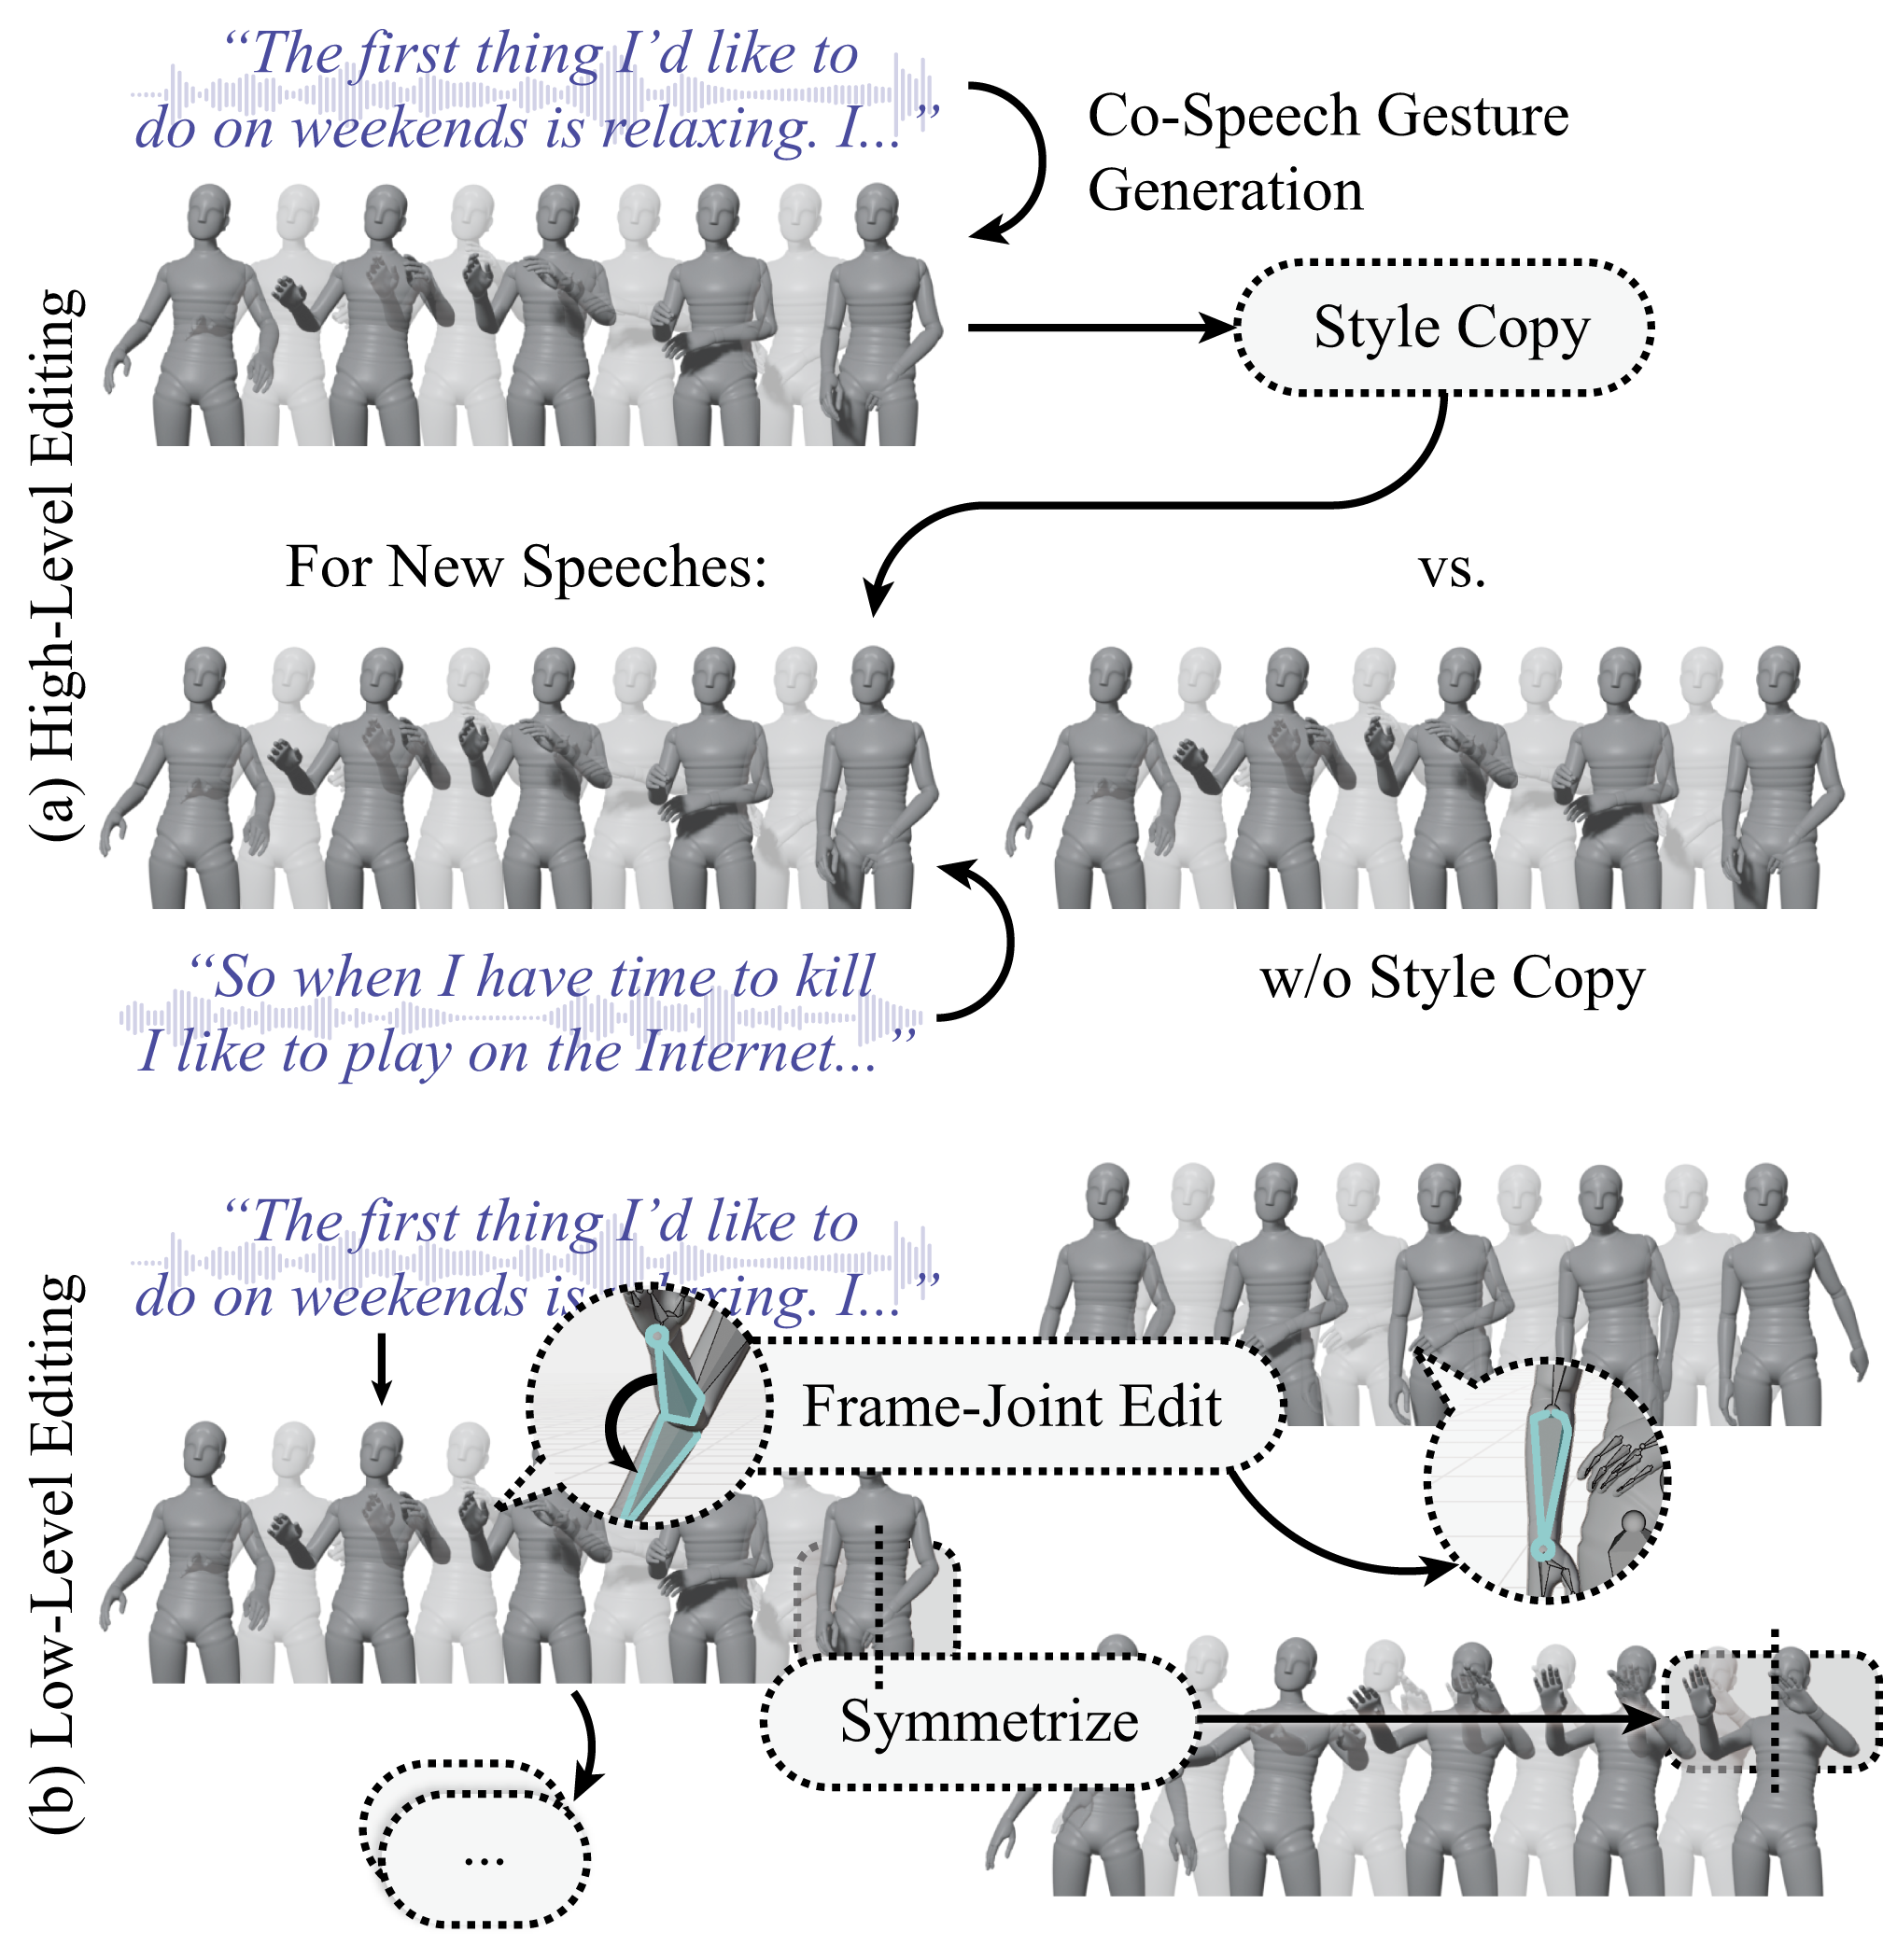 A Unified Editing Method for Co-Speech Gesture Generation via Diffusion Inversion